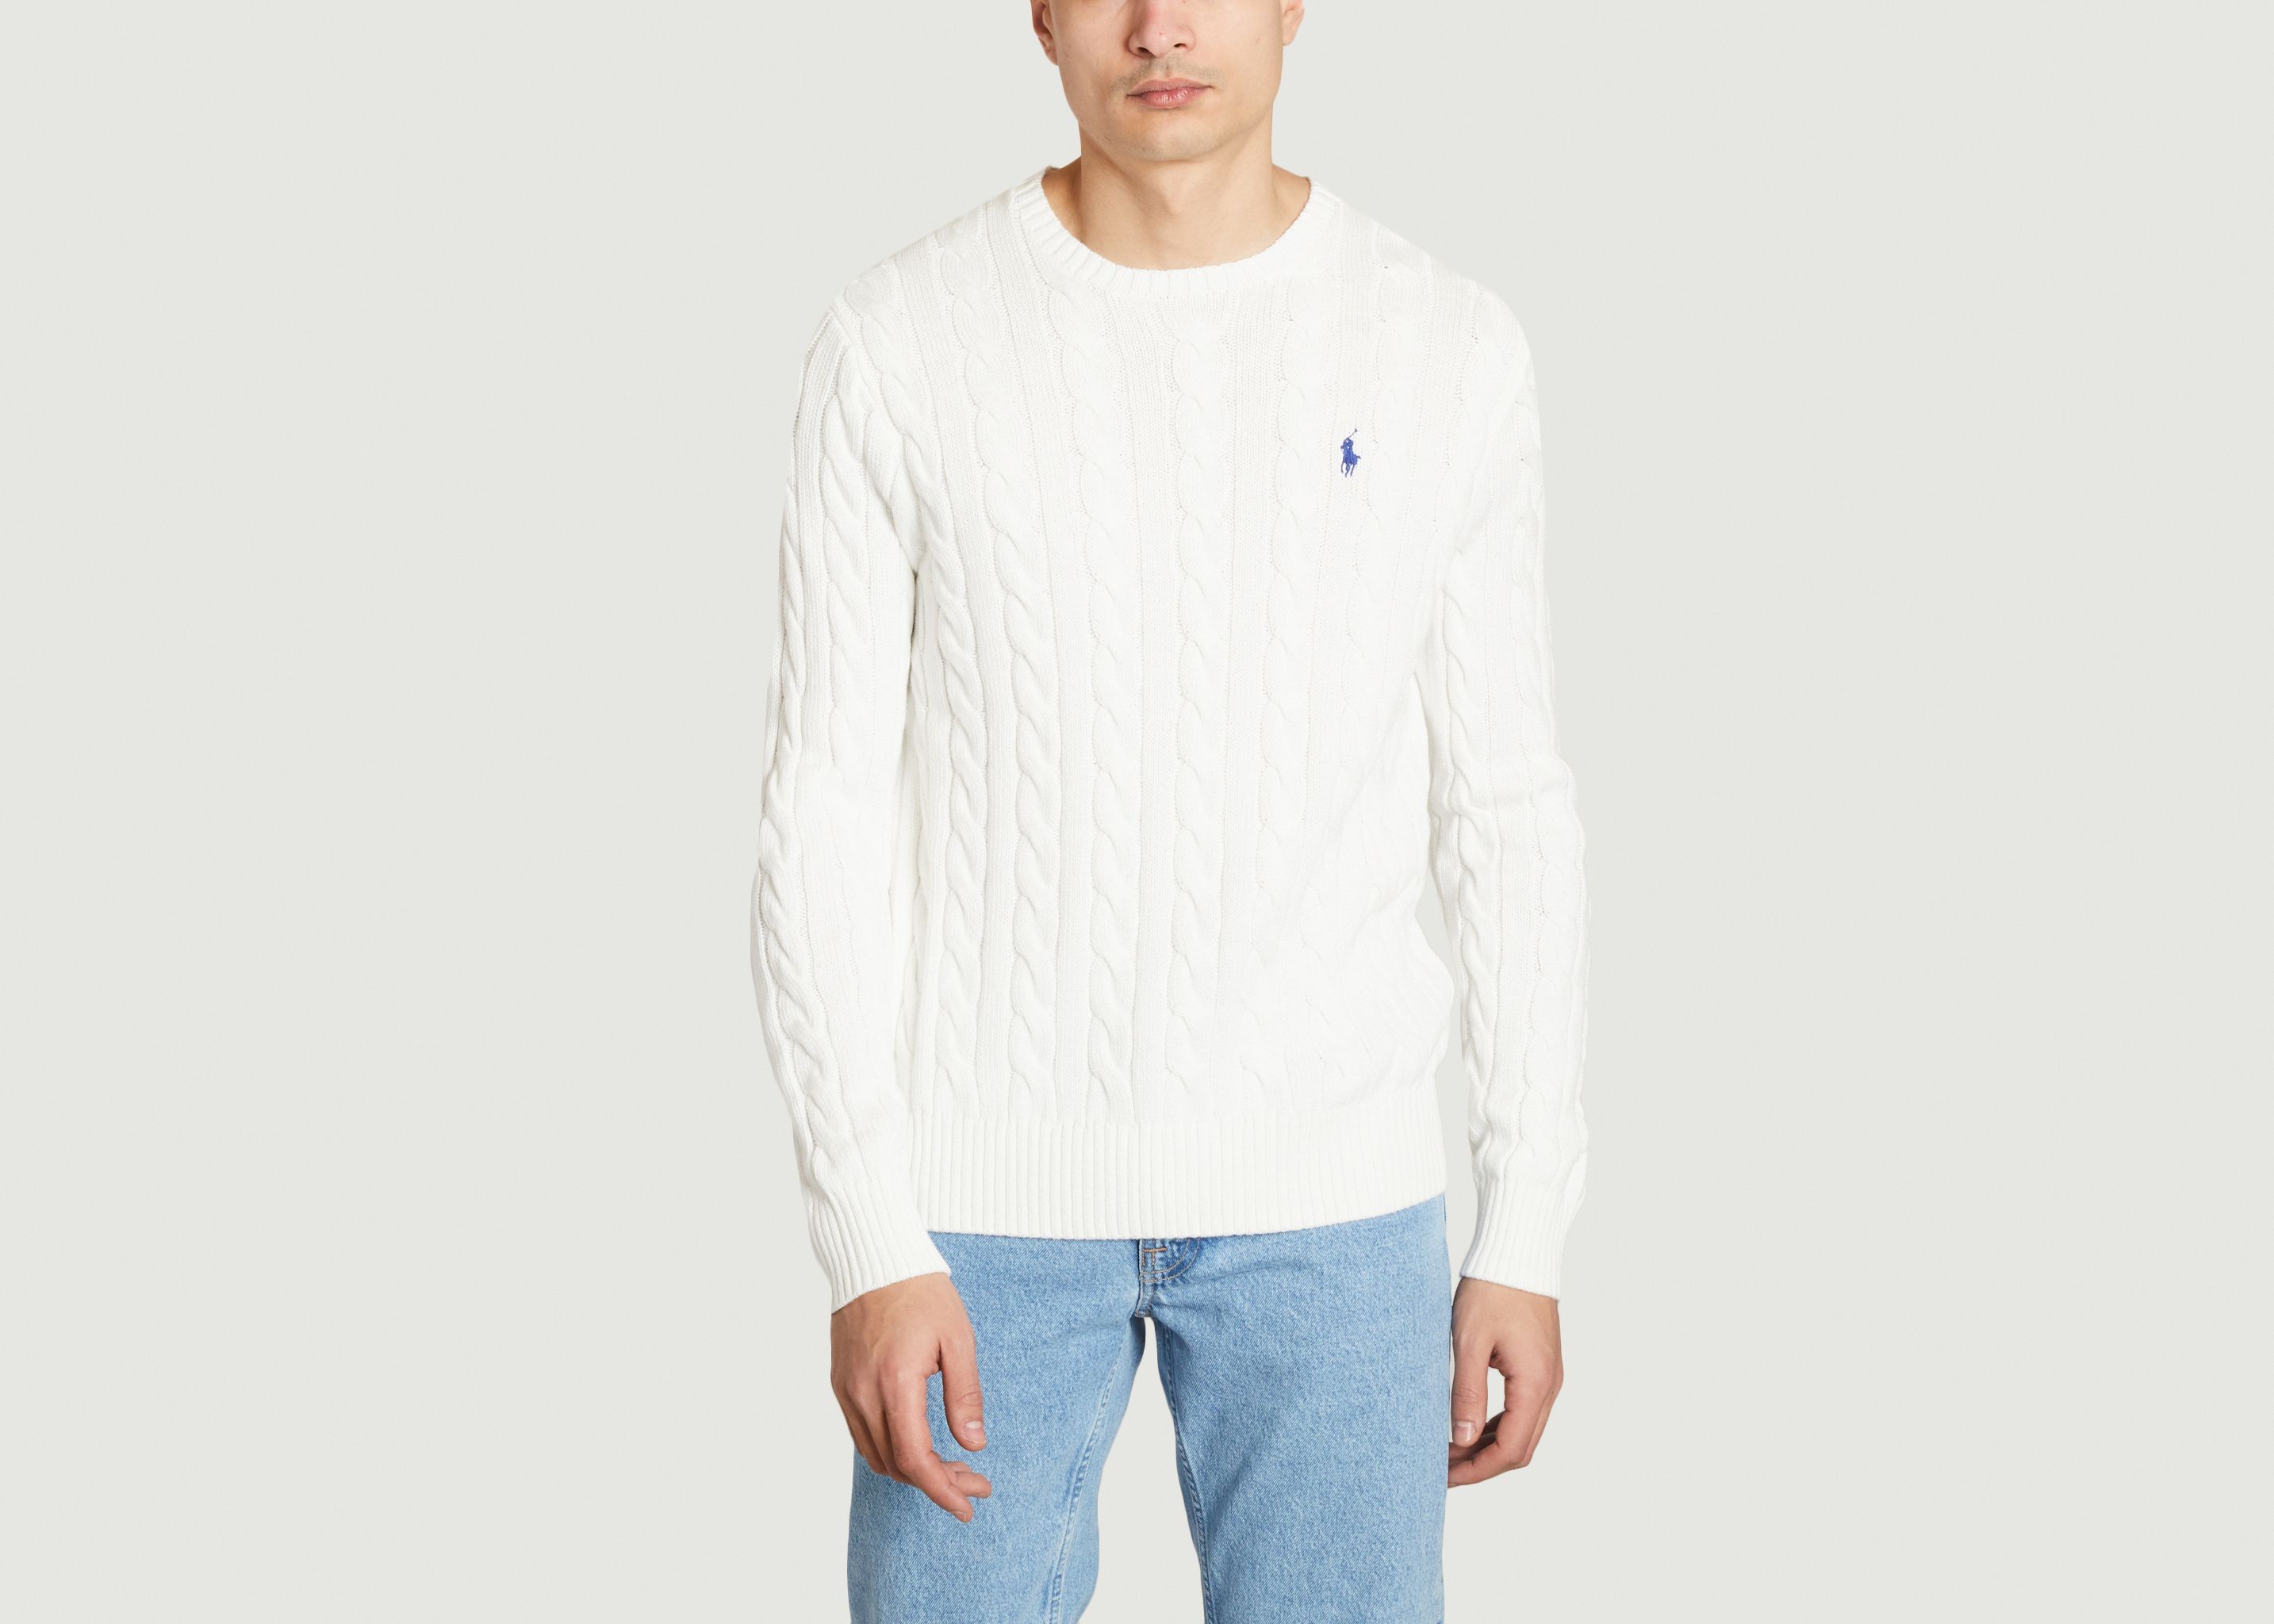 Twisted sweater Driver CN White Polo Ralph Lauren | L'Exception